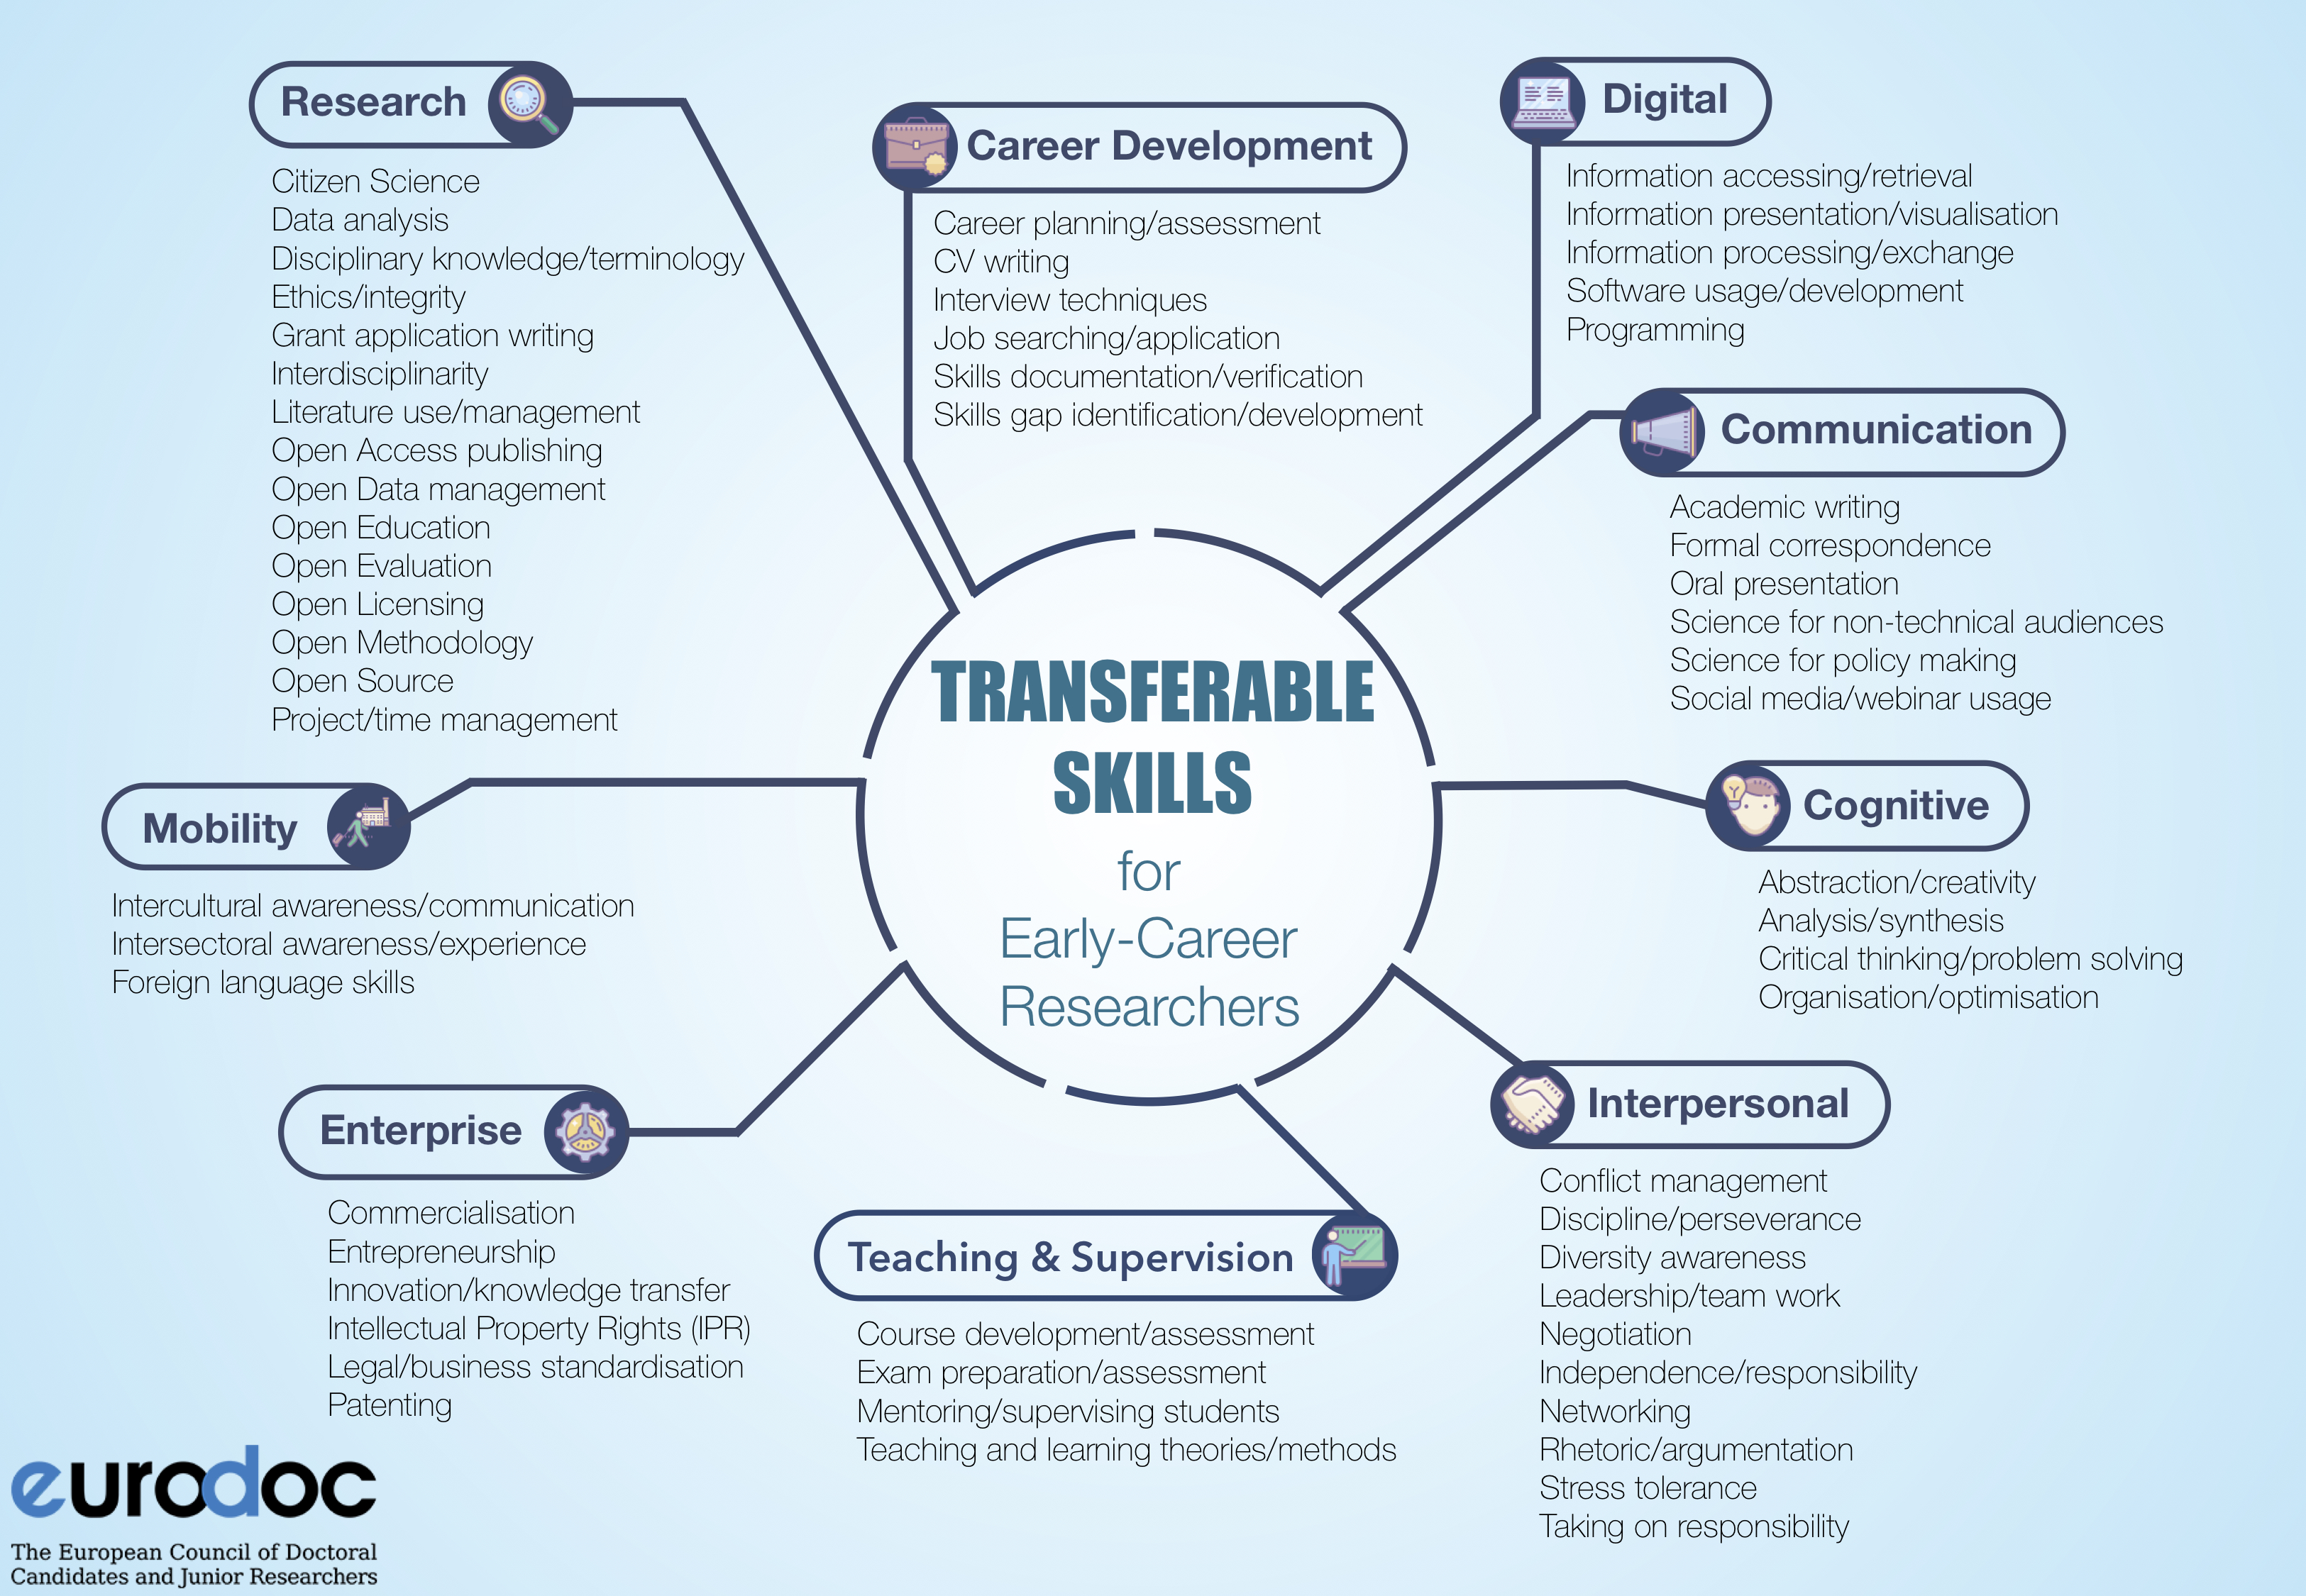 The 5 Types of Skills (Transferrable, Personal, Knowledge)